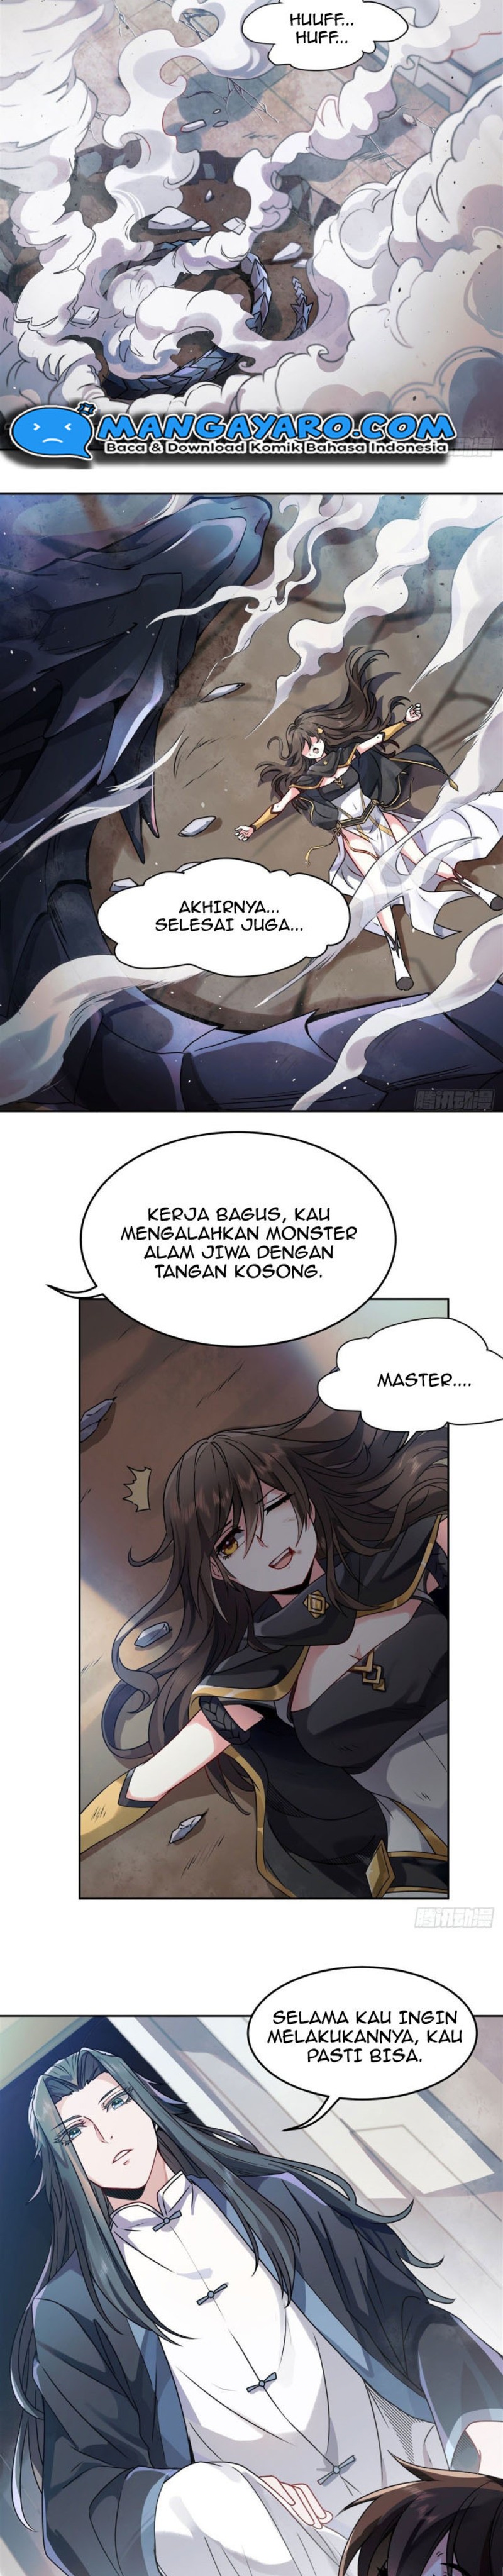 Dilarang COPAS - situs resmi www.mangacanblog.com - Komik my female apprentices are all big shots from the future 010 - chapter 10 11 Indonesia my female apprentices are all big shots from the future 010 - chapter 10 Terbaru 6|Baca Manga Komik Indonesia|Mangacan